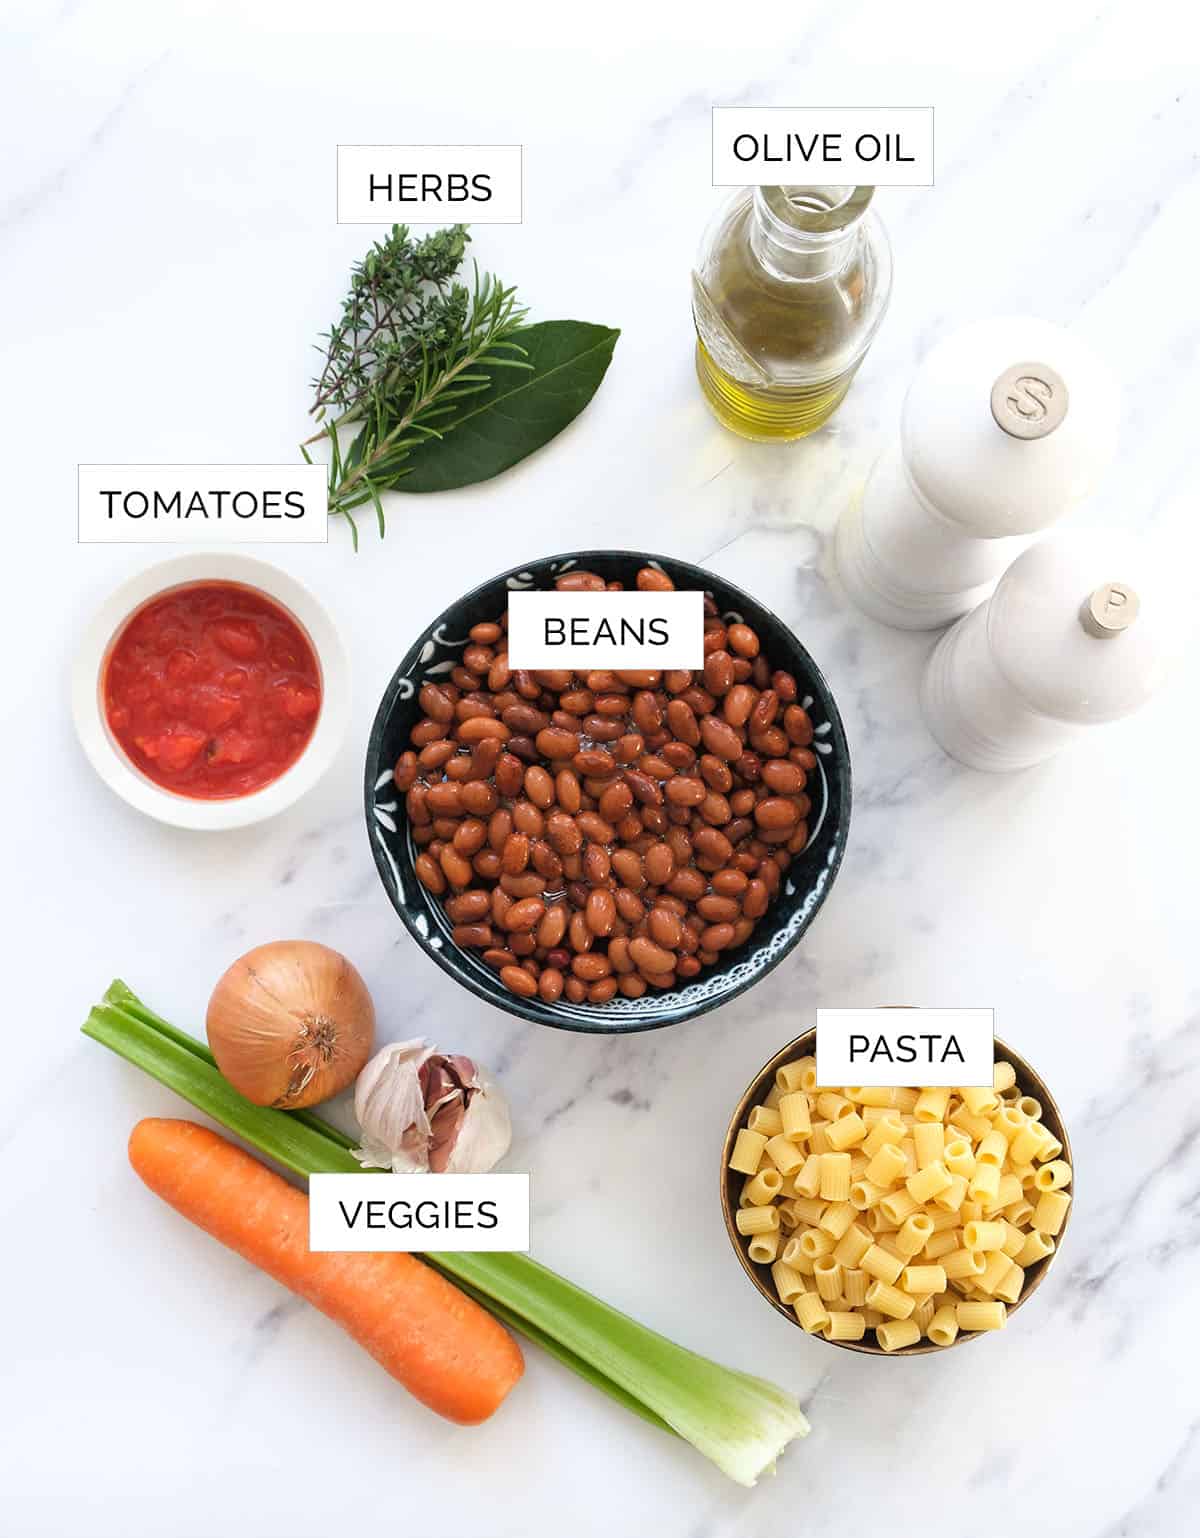 Top view of the ingredients to make pasta fazool over a white background.